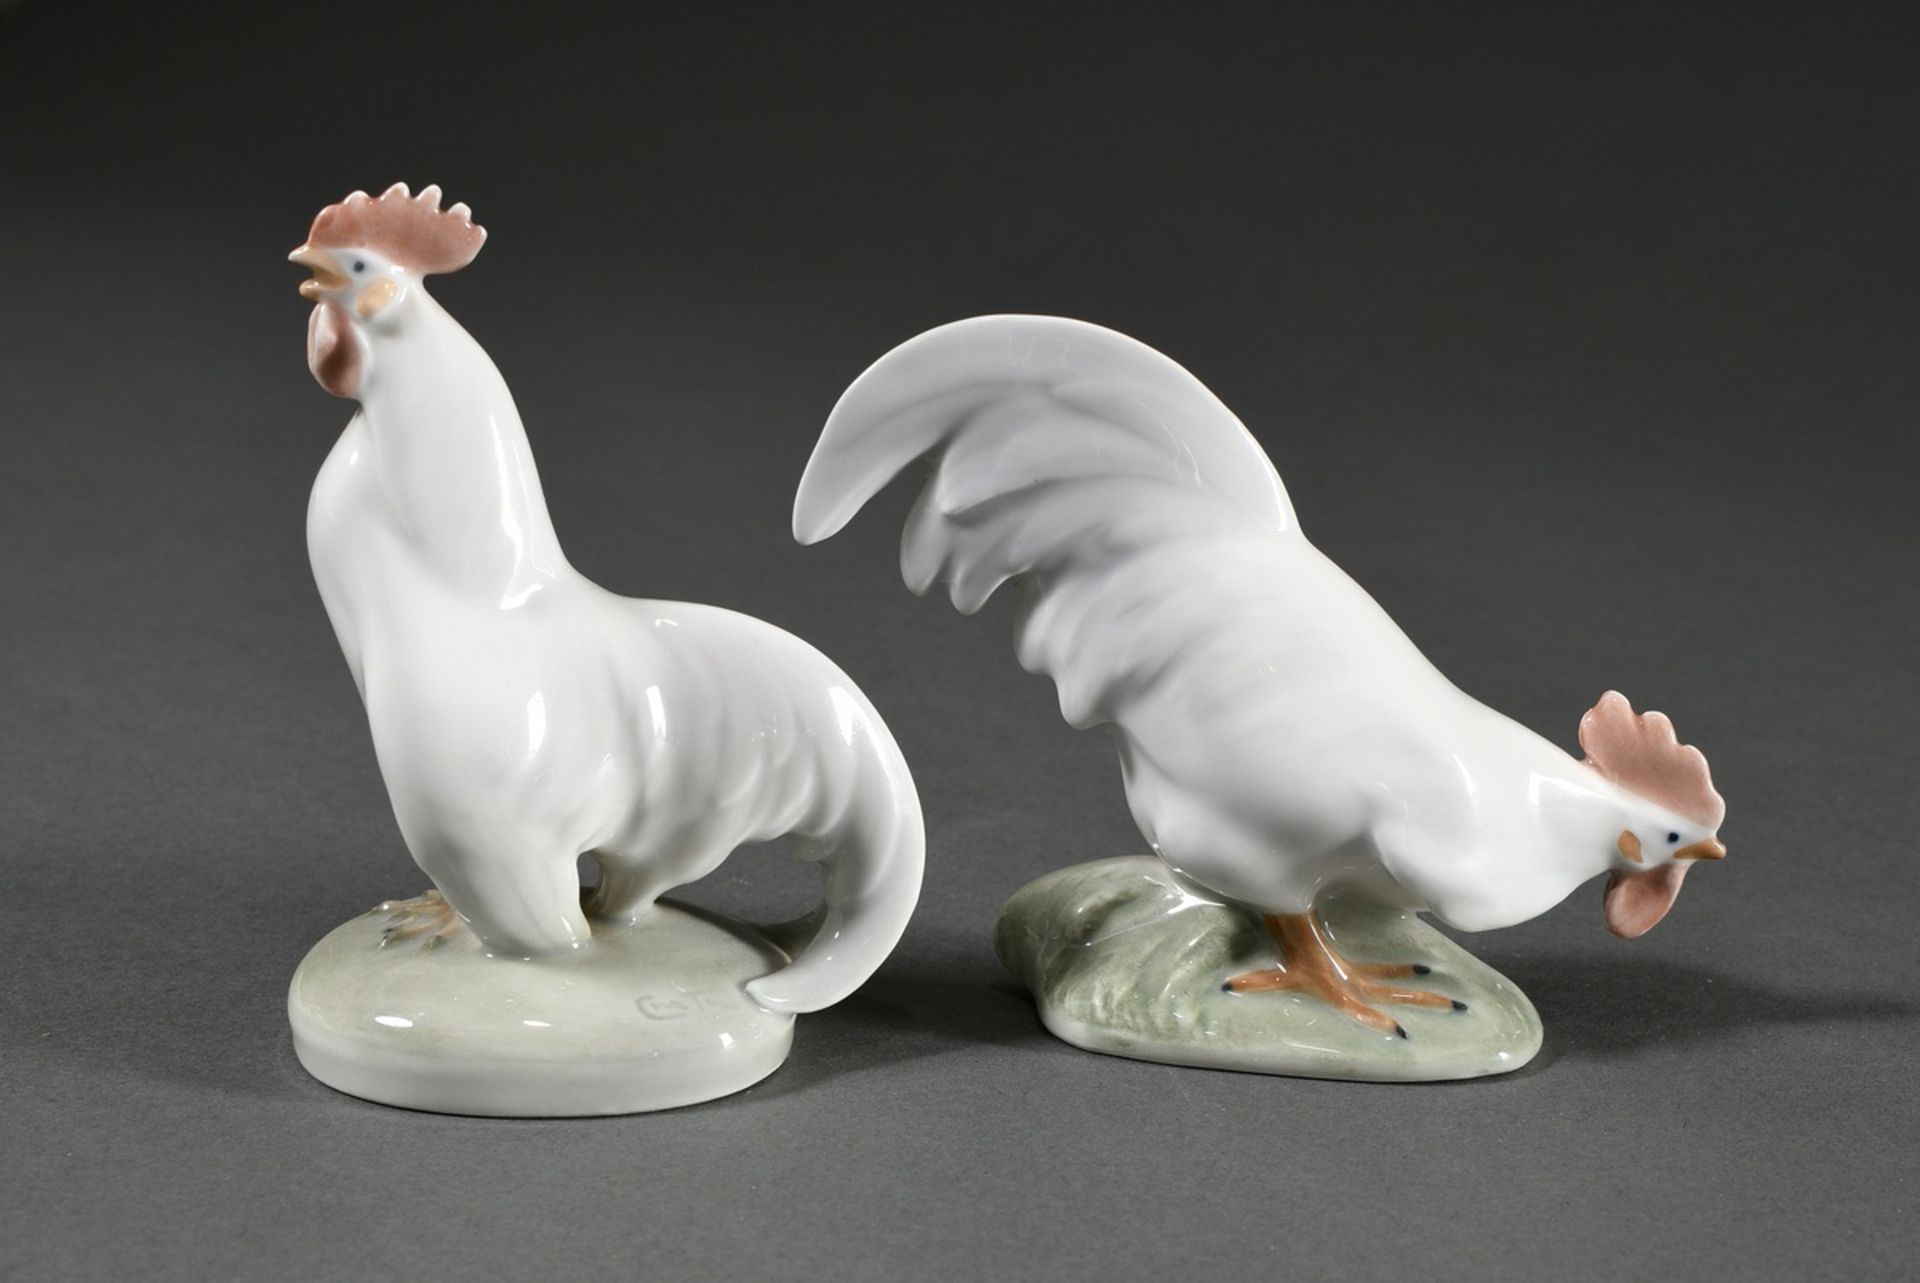 4 Various Royal Copenhagen figurines "Chickens" with polychrome underglaze painting, model no. 1024 - Image 6 of 7